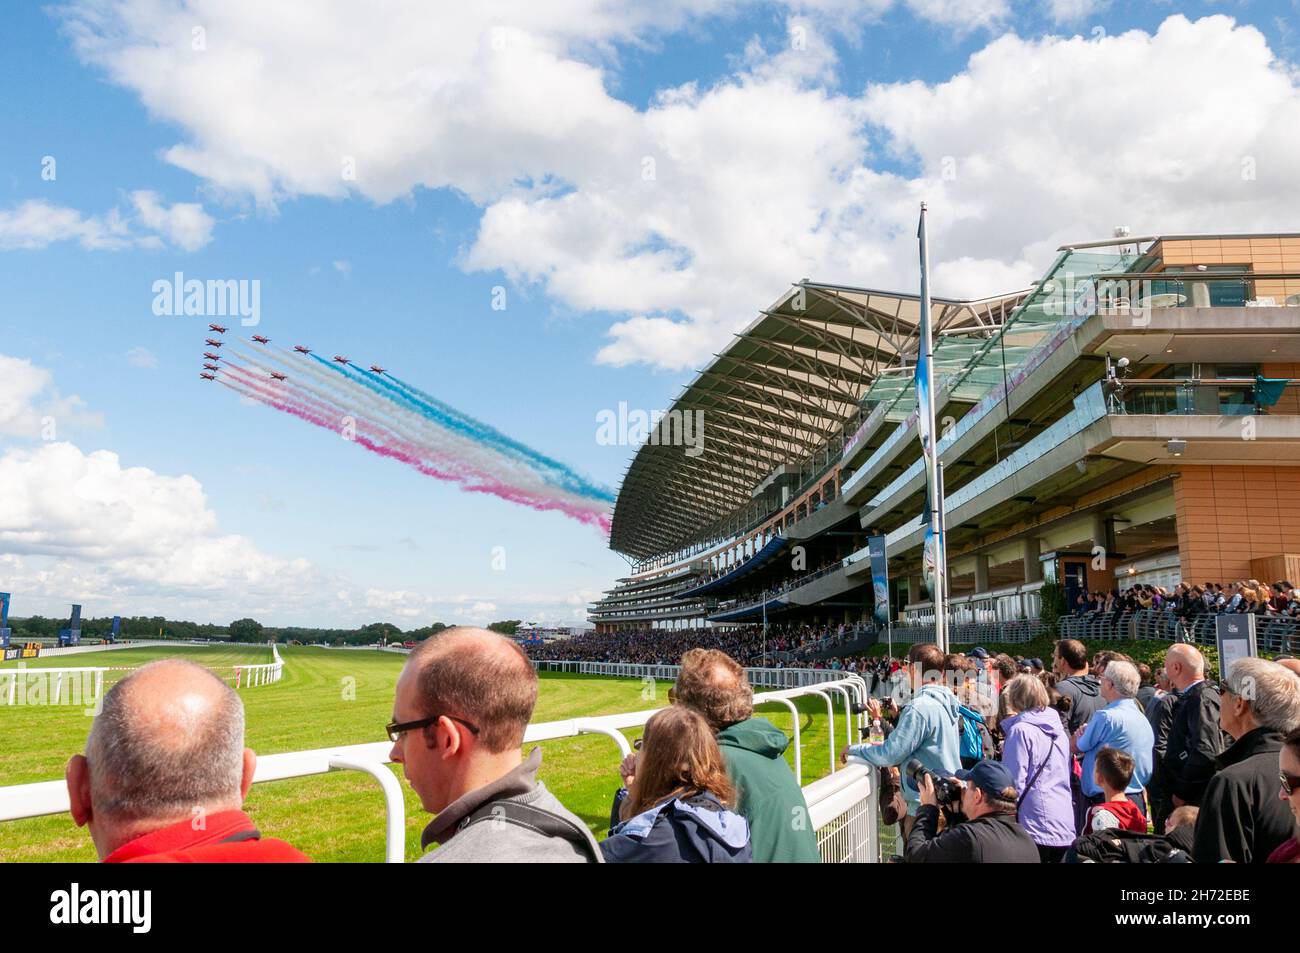 Royal Air Force Red Arrows display team flypast over the grandstand at Royal Ascot racecourse, Royal Berkshire, UK, during the Red Bull Air Race event Stock Photo